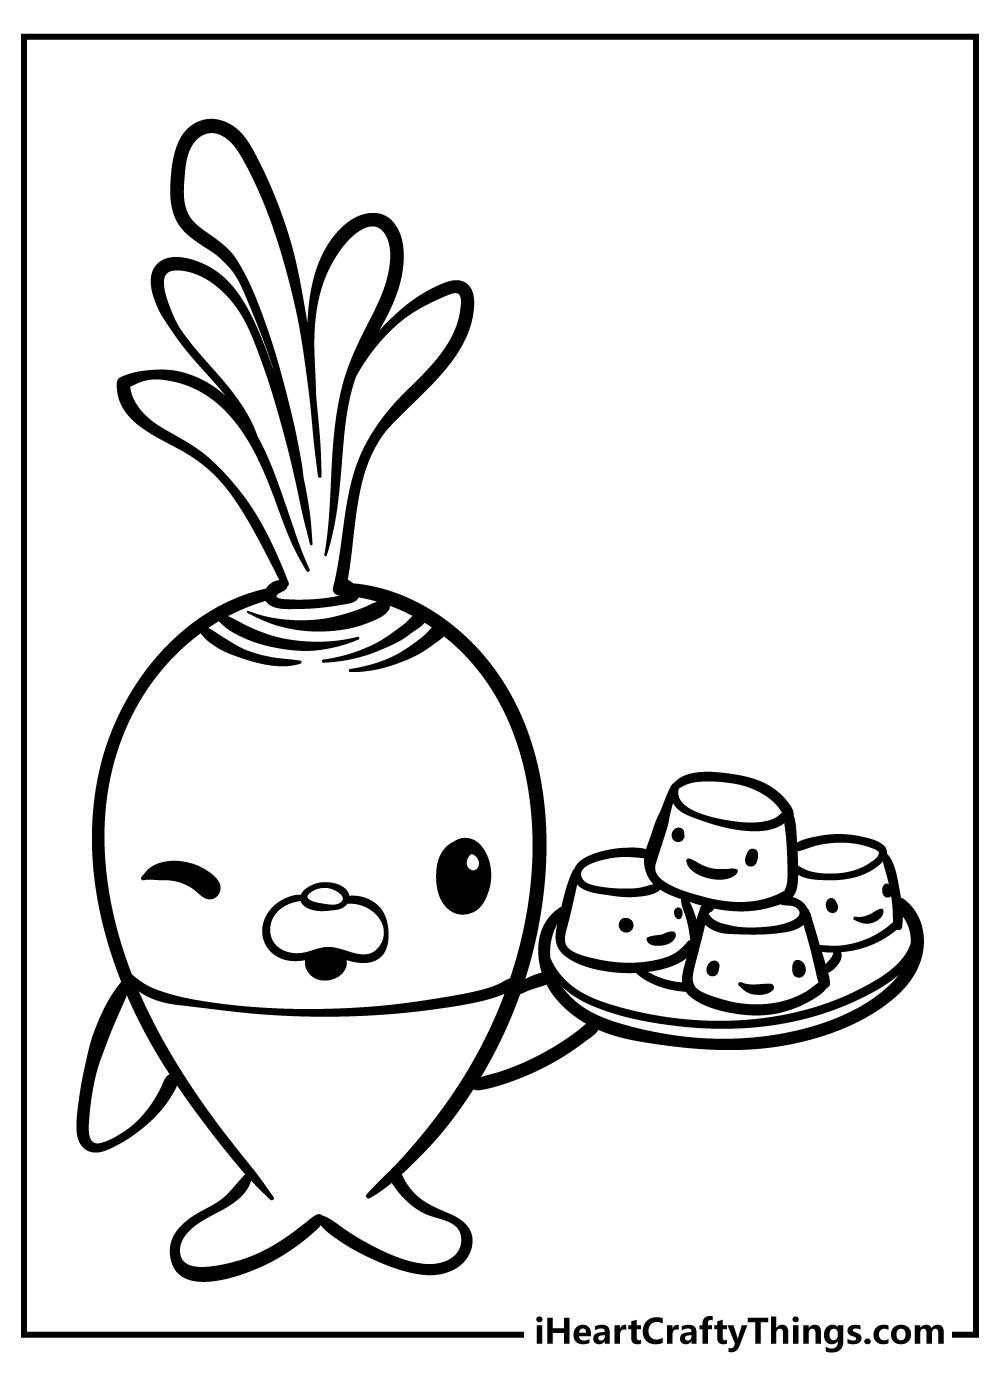 Octonauts Coloring Pages for adults free printable